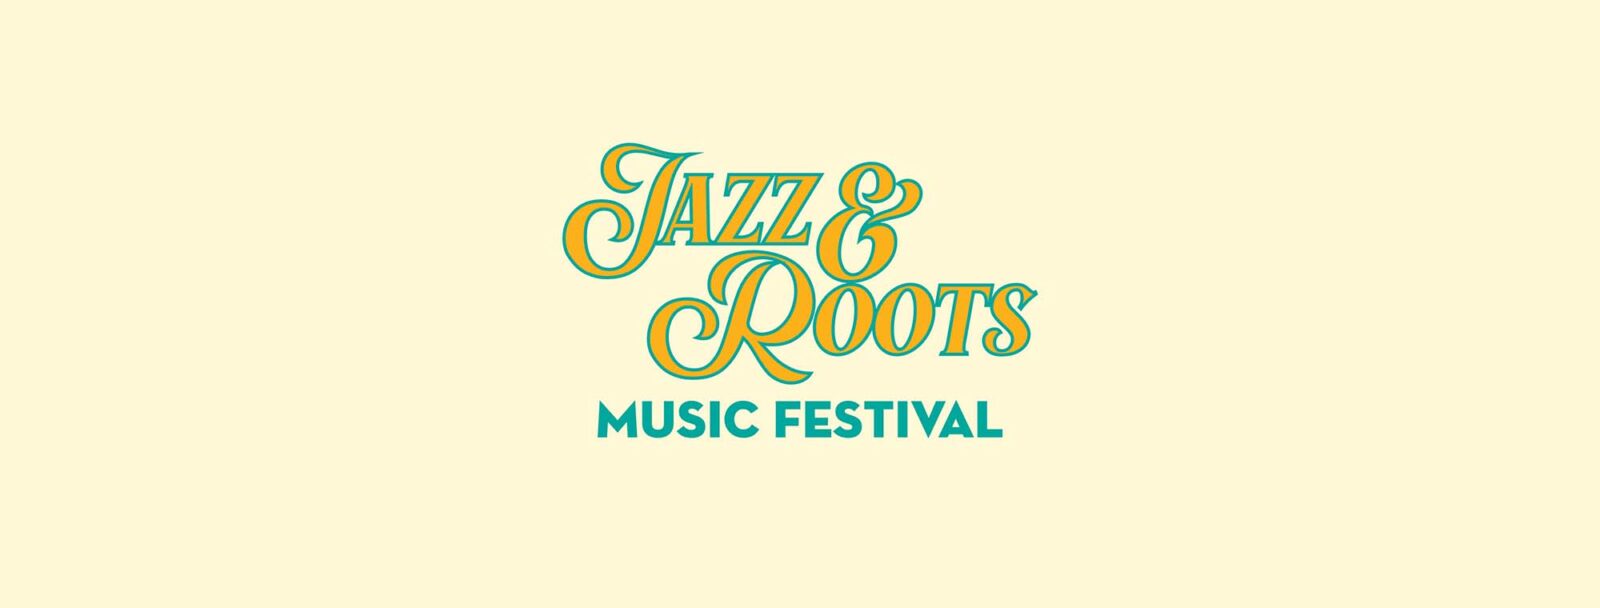 Jazz and Roots music festival